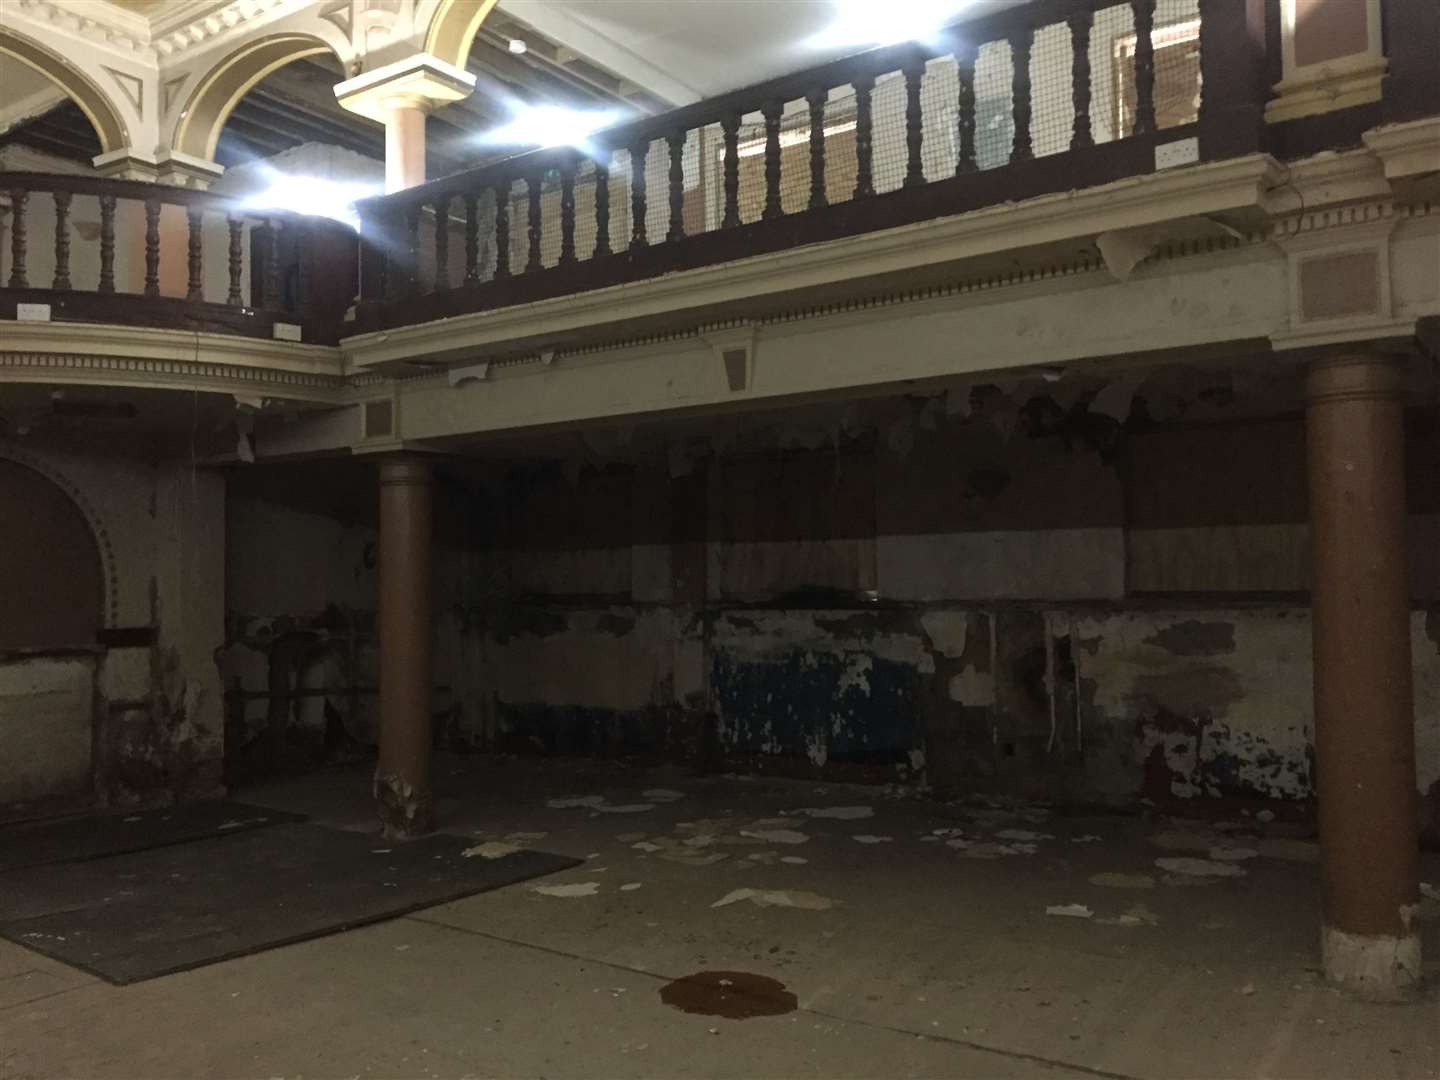 Having been closed for a decade, the building is suffering from water damage, mould and holes in the ceilings